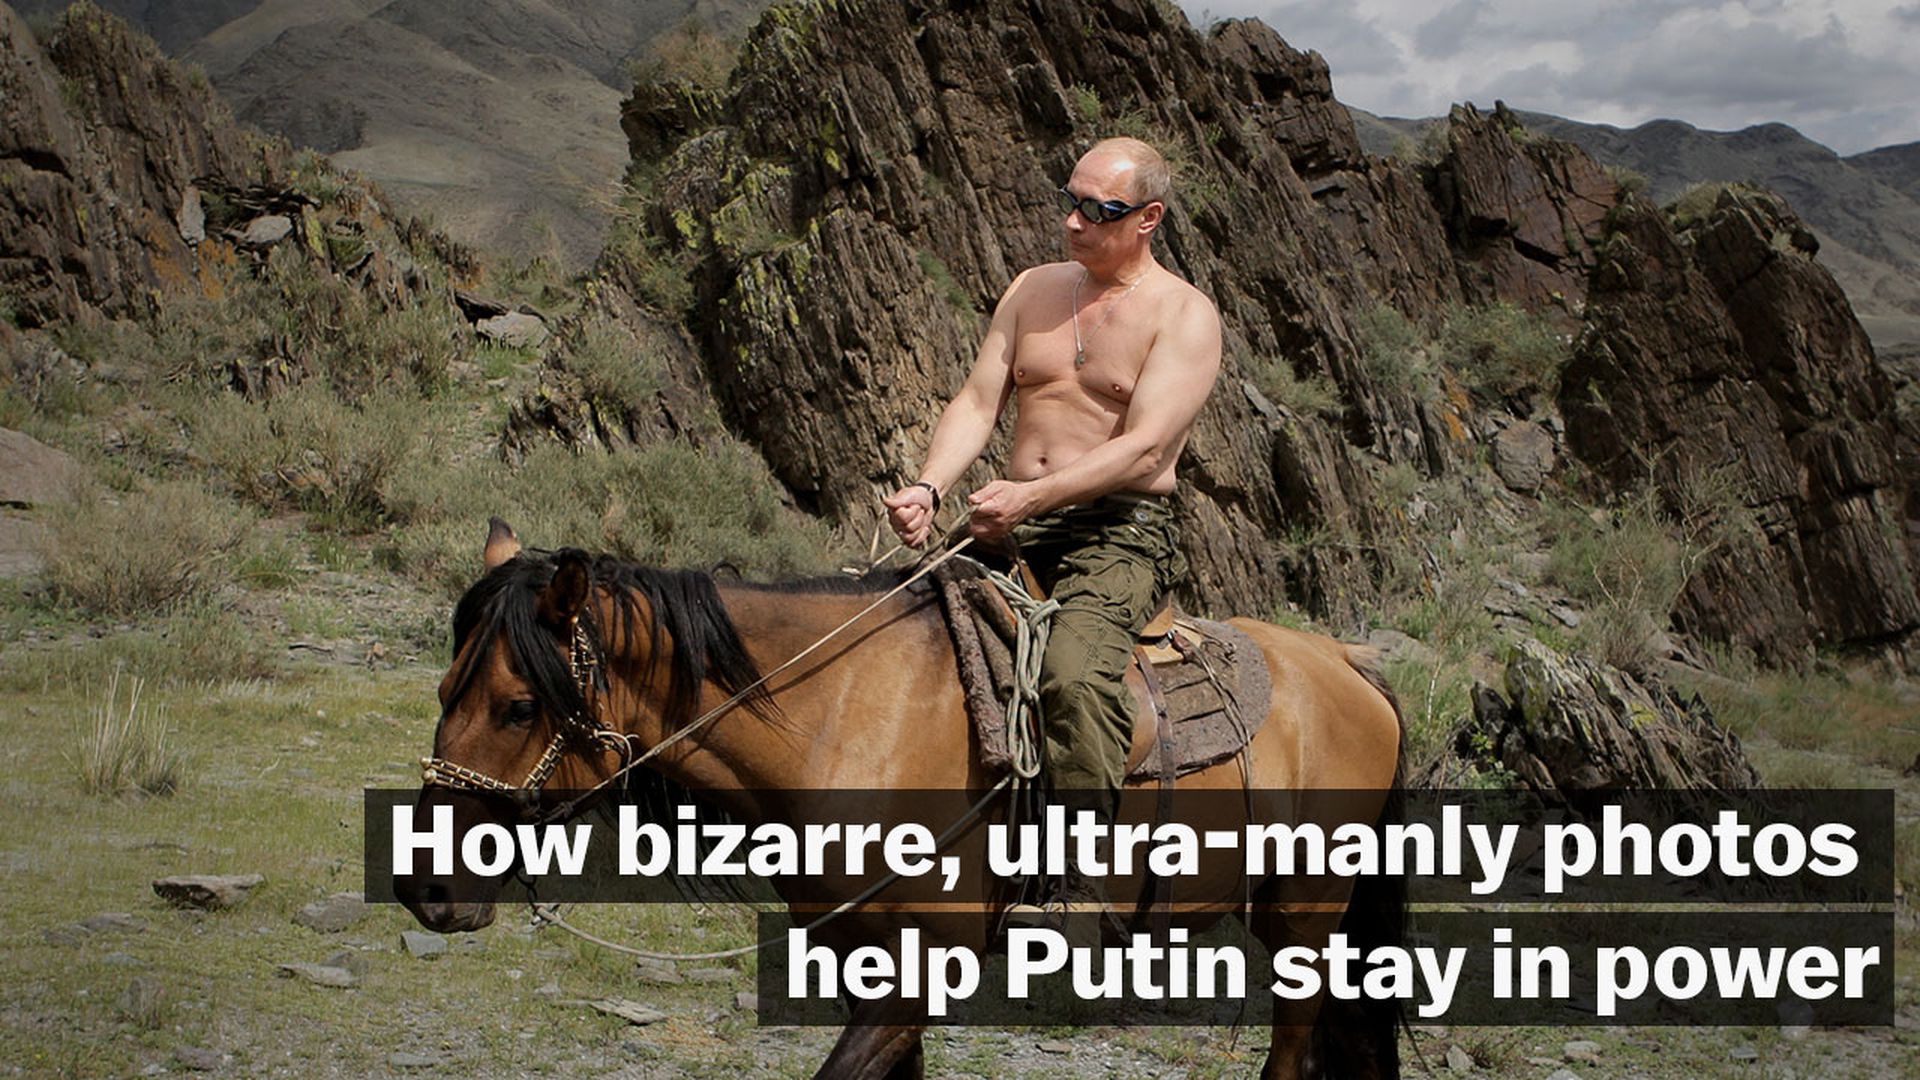 How bizarre, ultra-manly photos help Putin stay in power - Vox